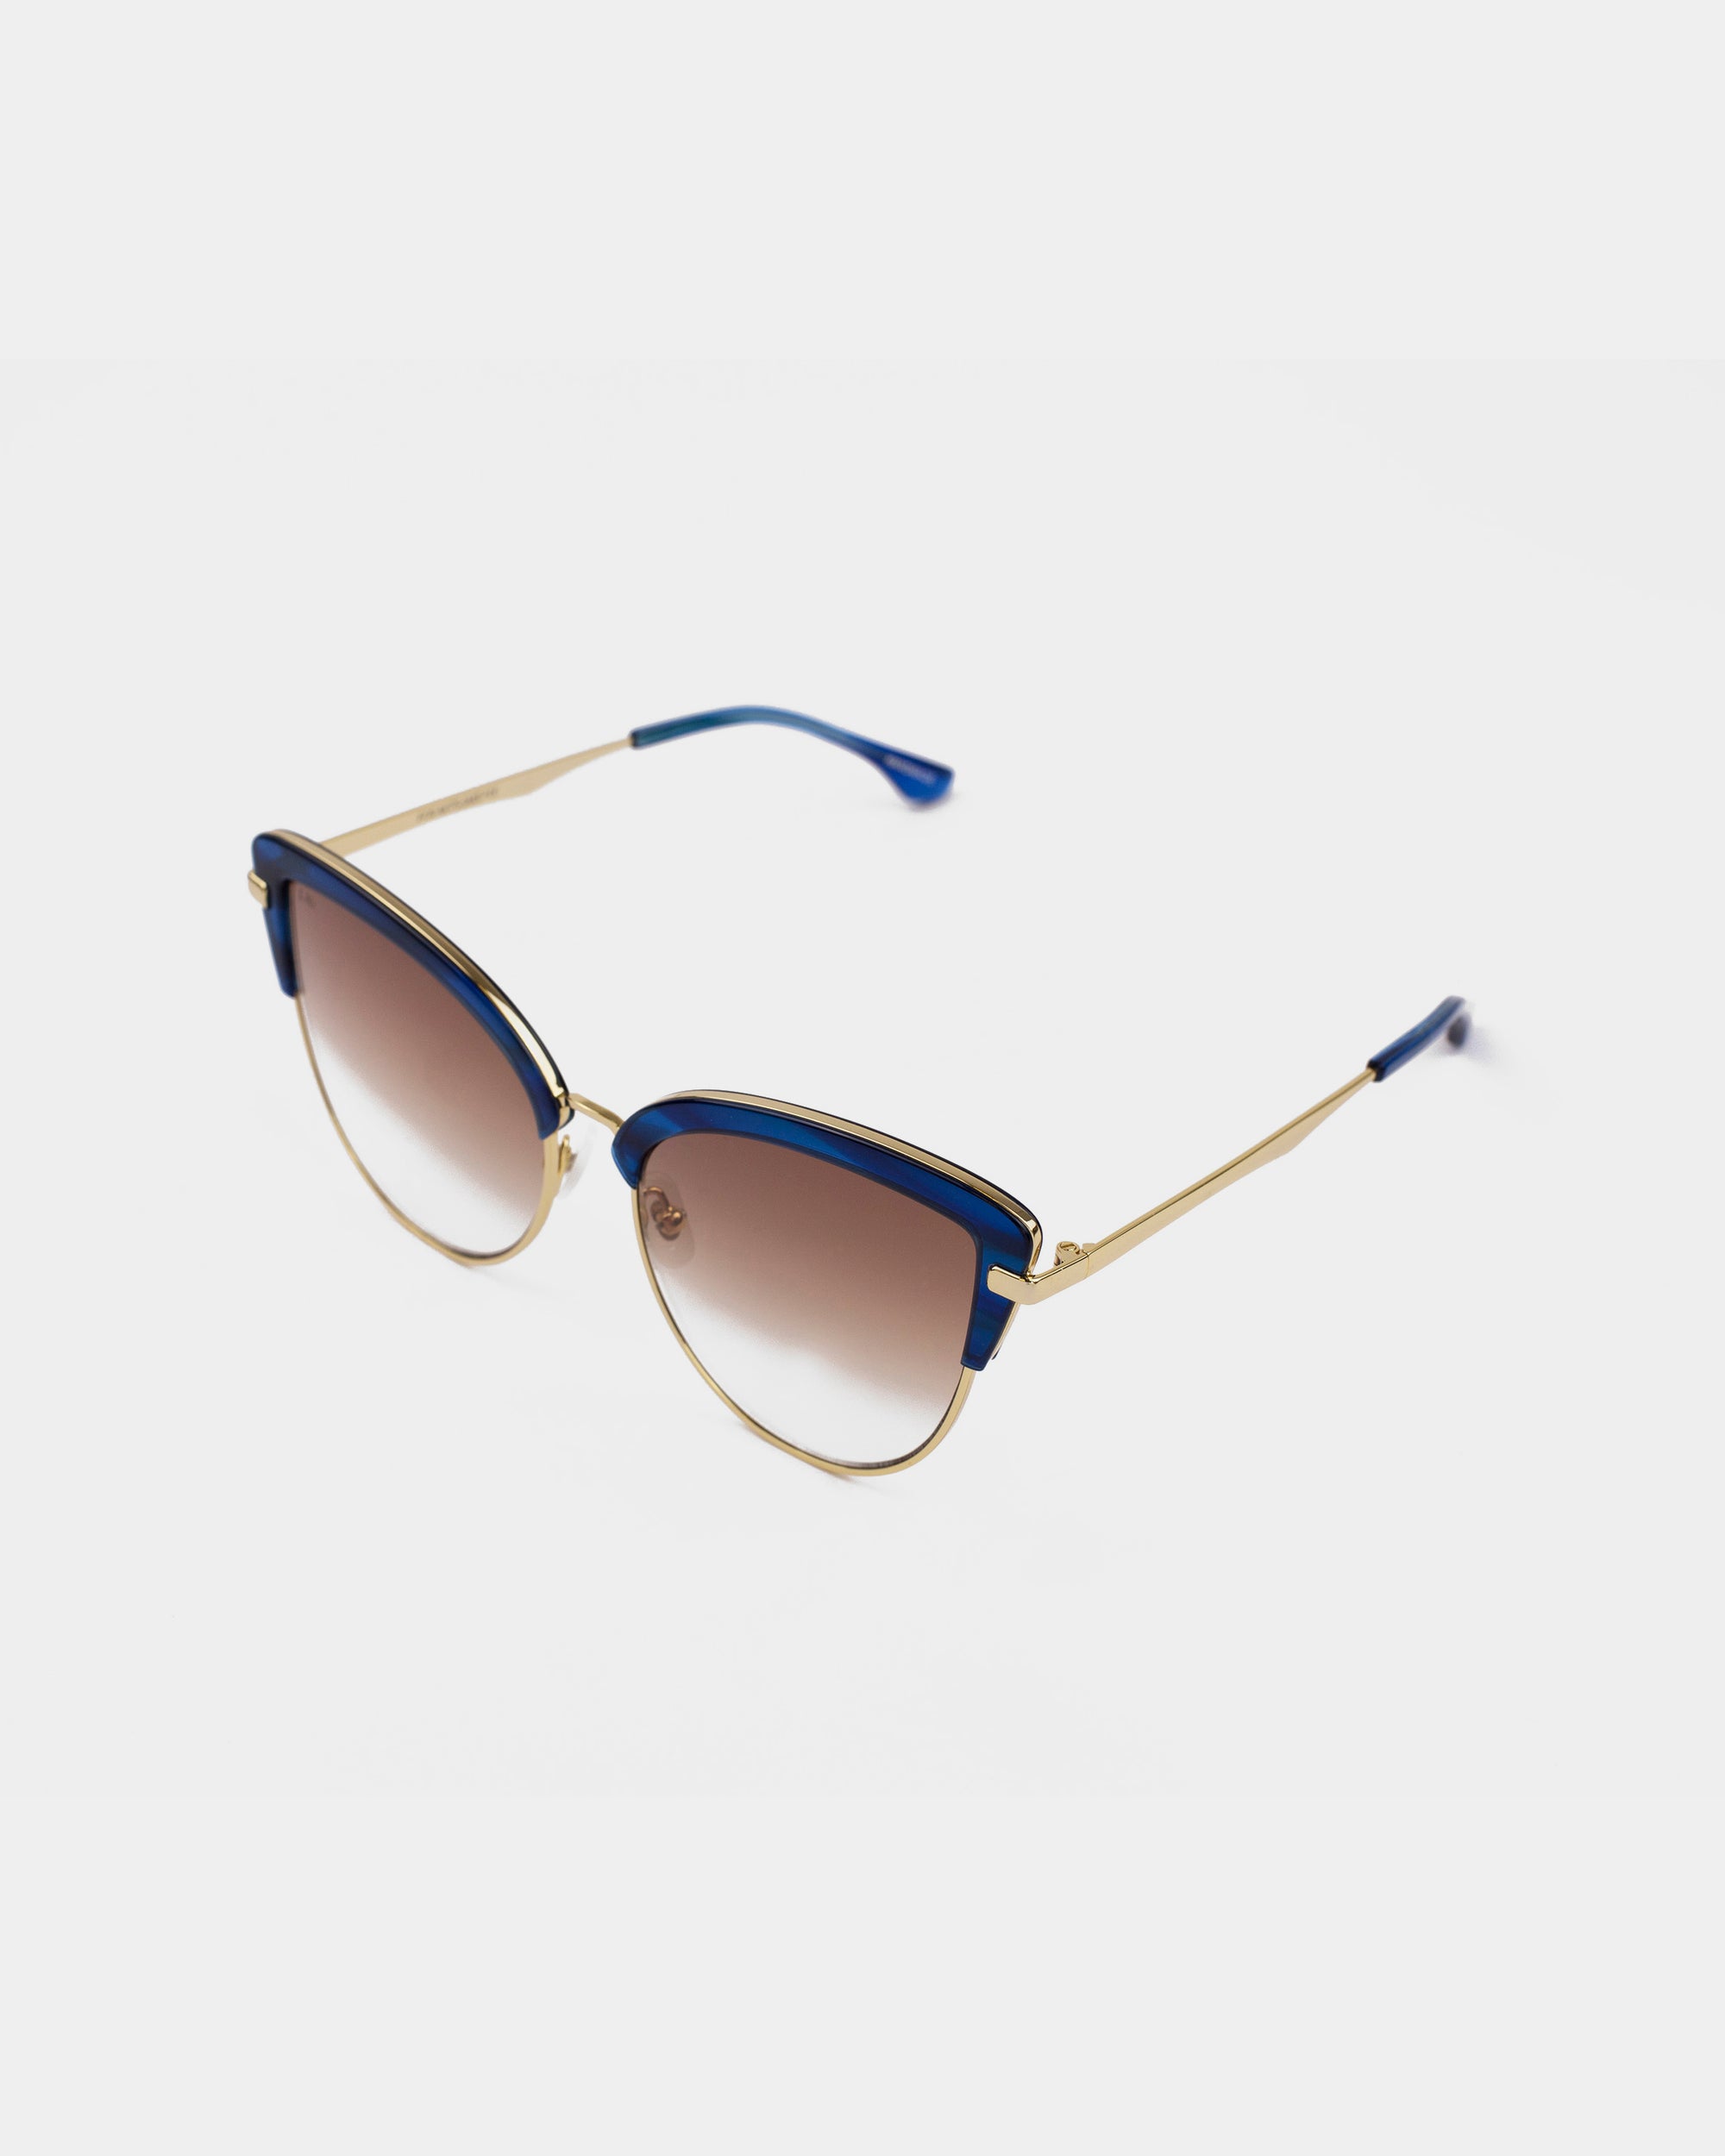 A pair of stylish Venus sunglasses by For Art's Sake® featuring stainless steel frames with 18-karat gold plating, blue accents along the top edge, and gradient brown nylon lenses. The temple arms are gold with blue tips, giving the eyewear a fashionable and elegant look.